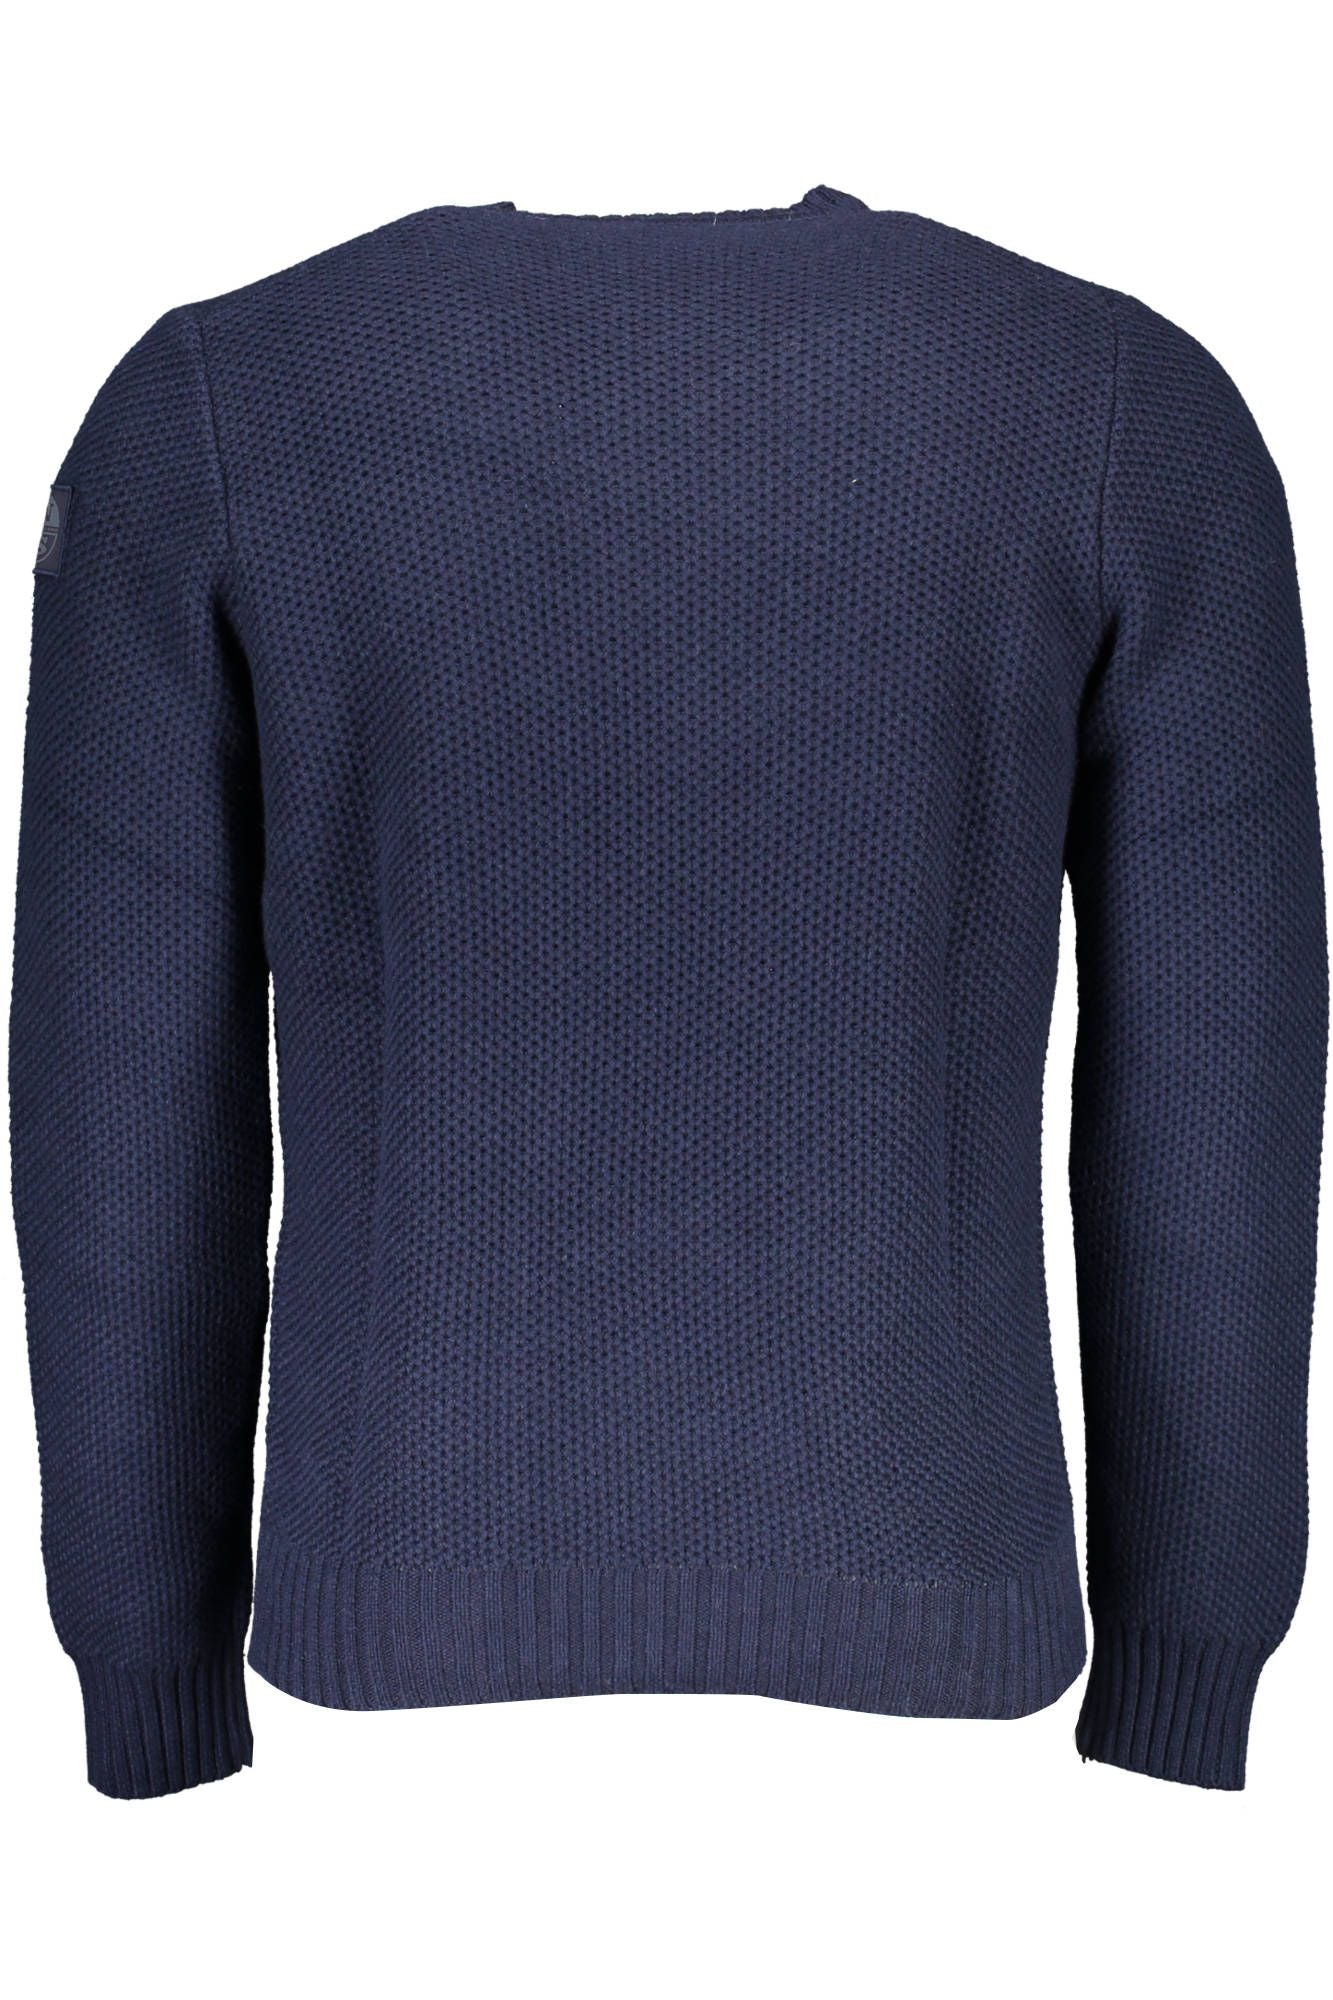 Blue Round Neck Sweater with Contrasting Details